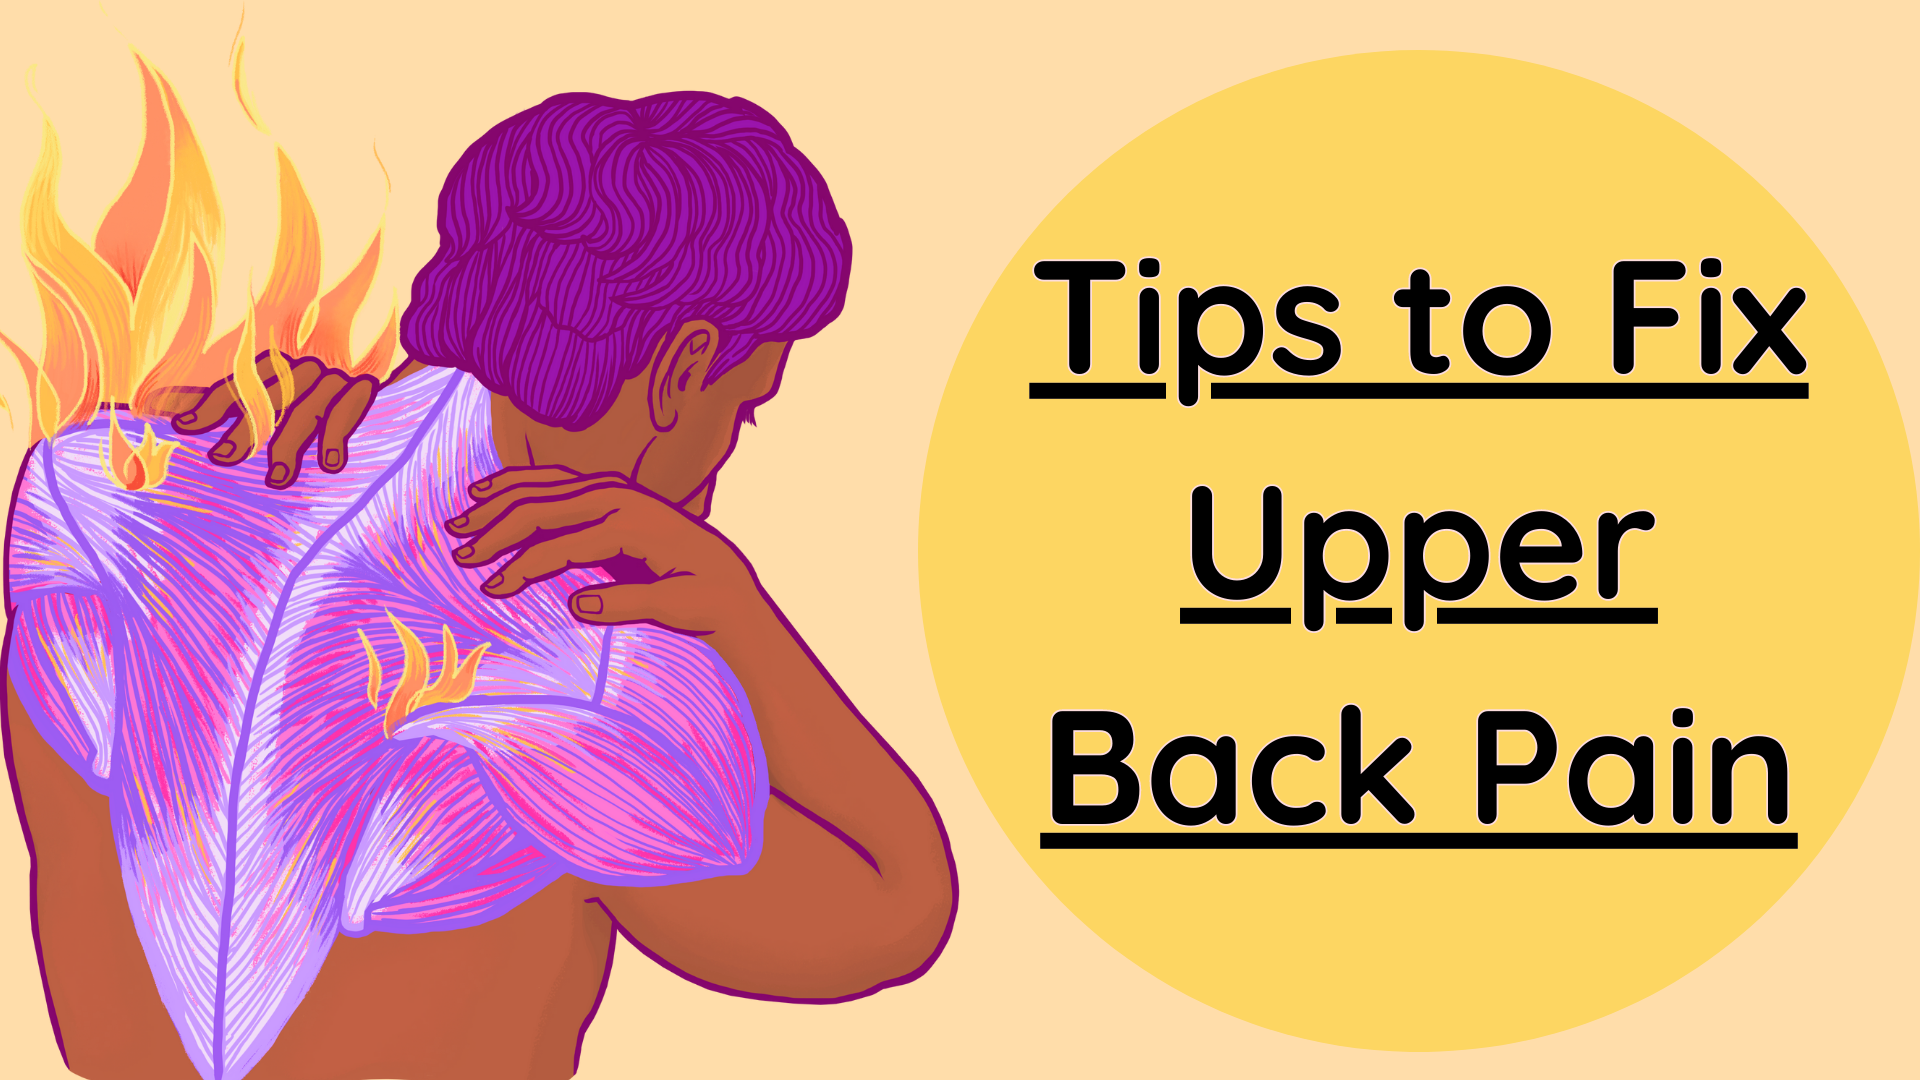 Tips to Fix Upper Back Pain